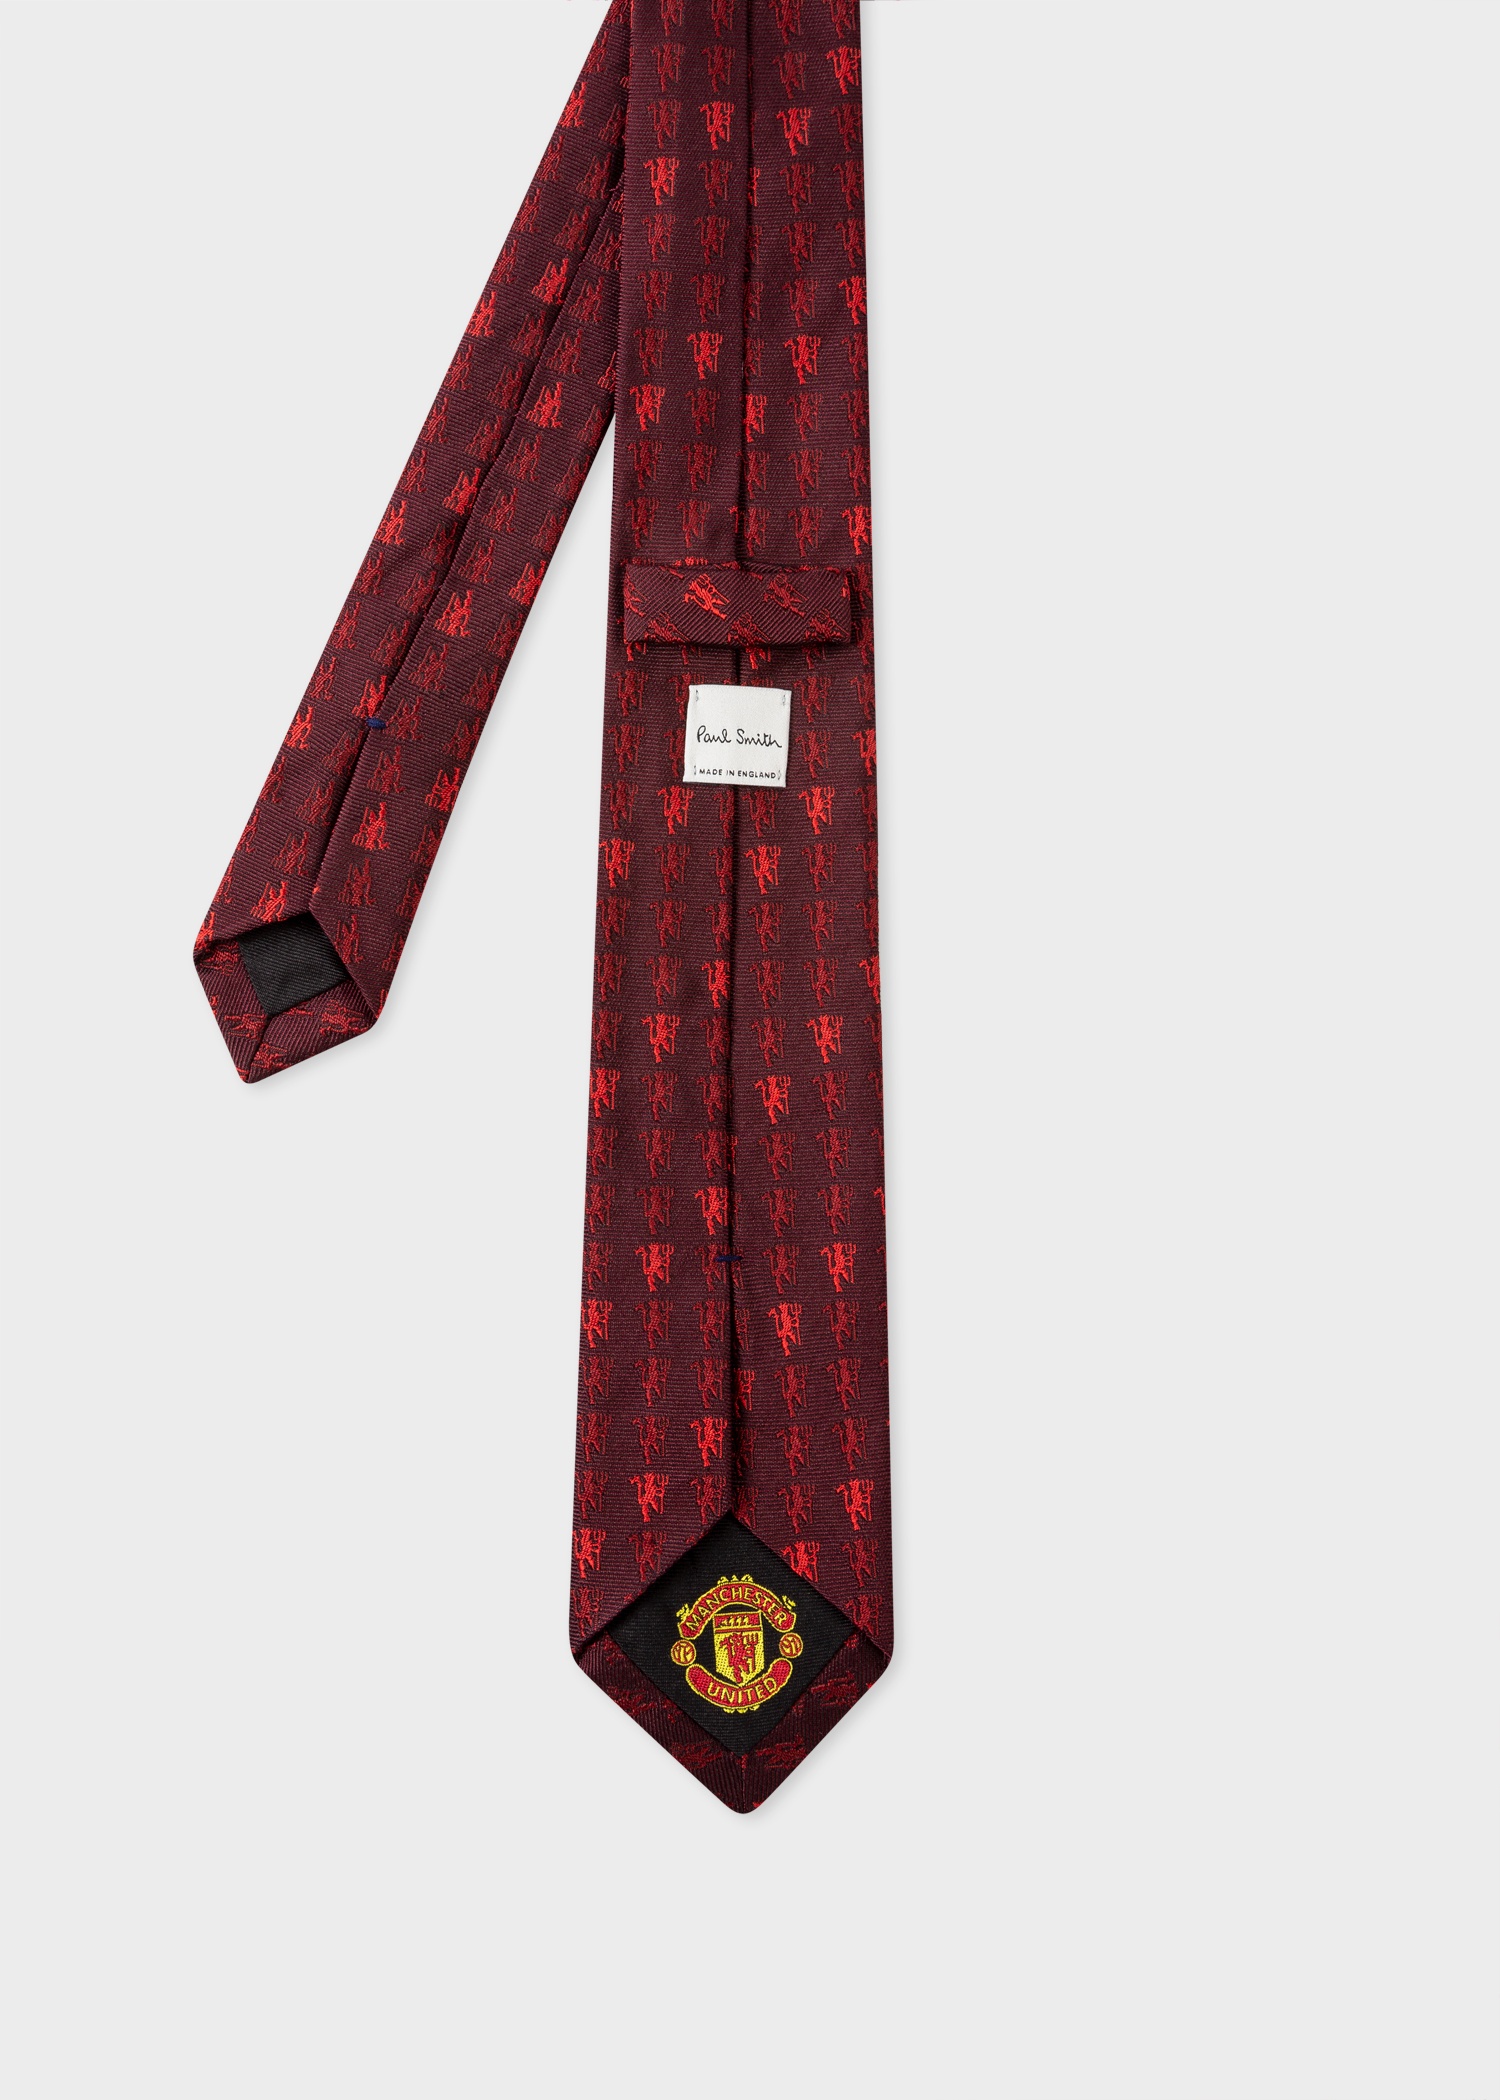 Paul Smith & Manchester United - 'Red Devil' Narrow Silk Tie - 2